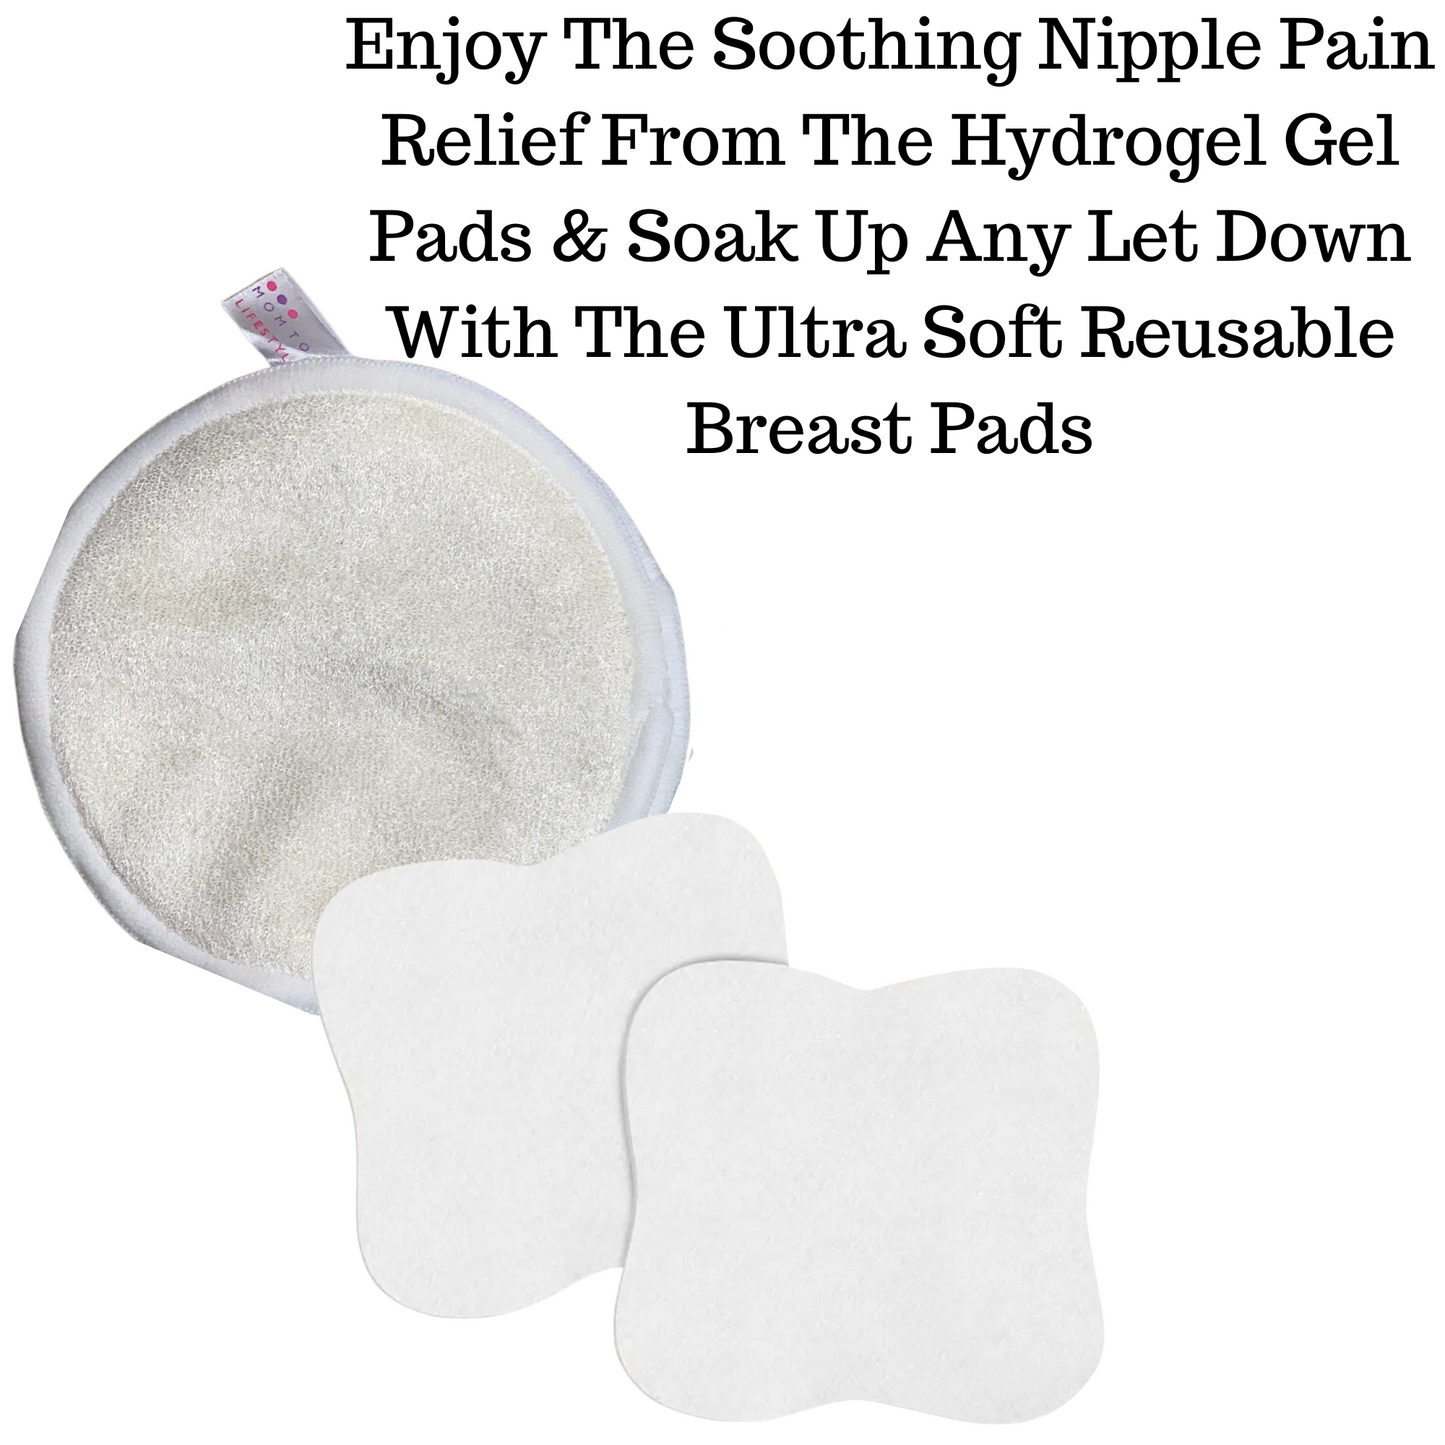 Soft Breast pads hydrogel pads sooth sore nipple relief Houston Texas